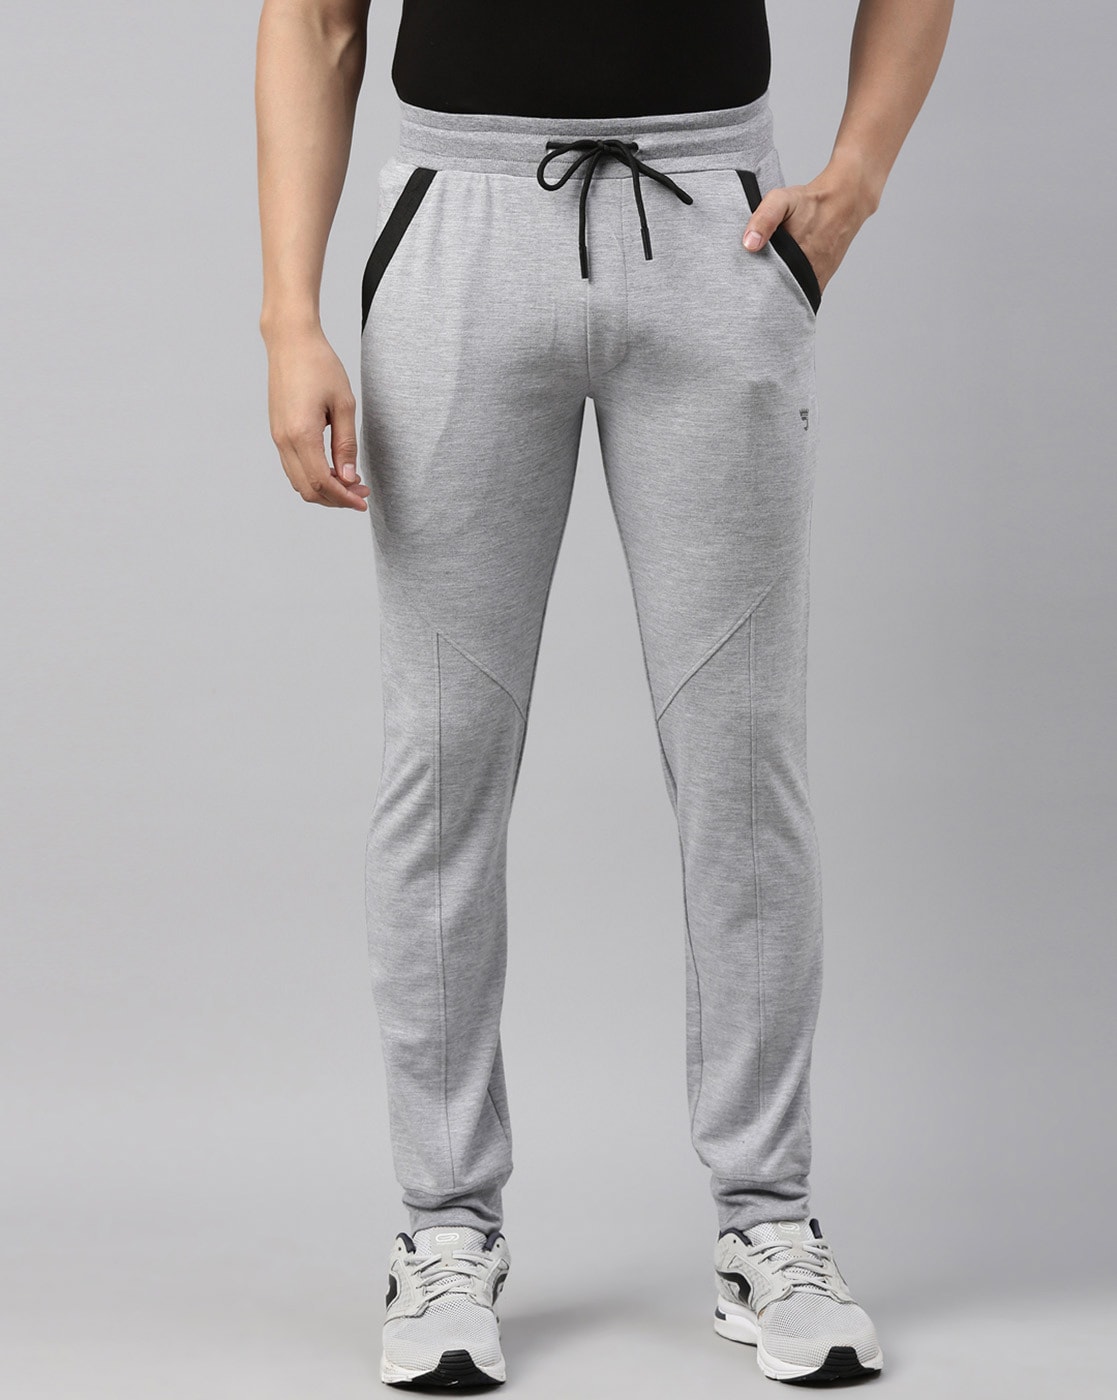 Styli Grey Solid Oversized Fit Elastic Cuff Jogger